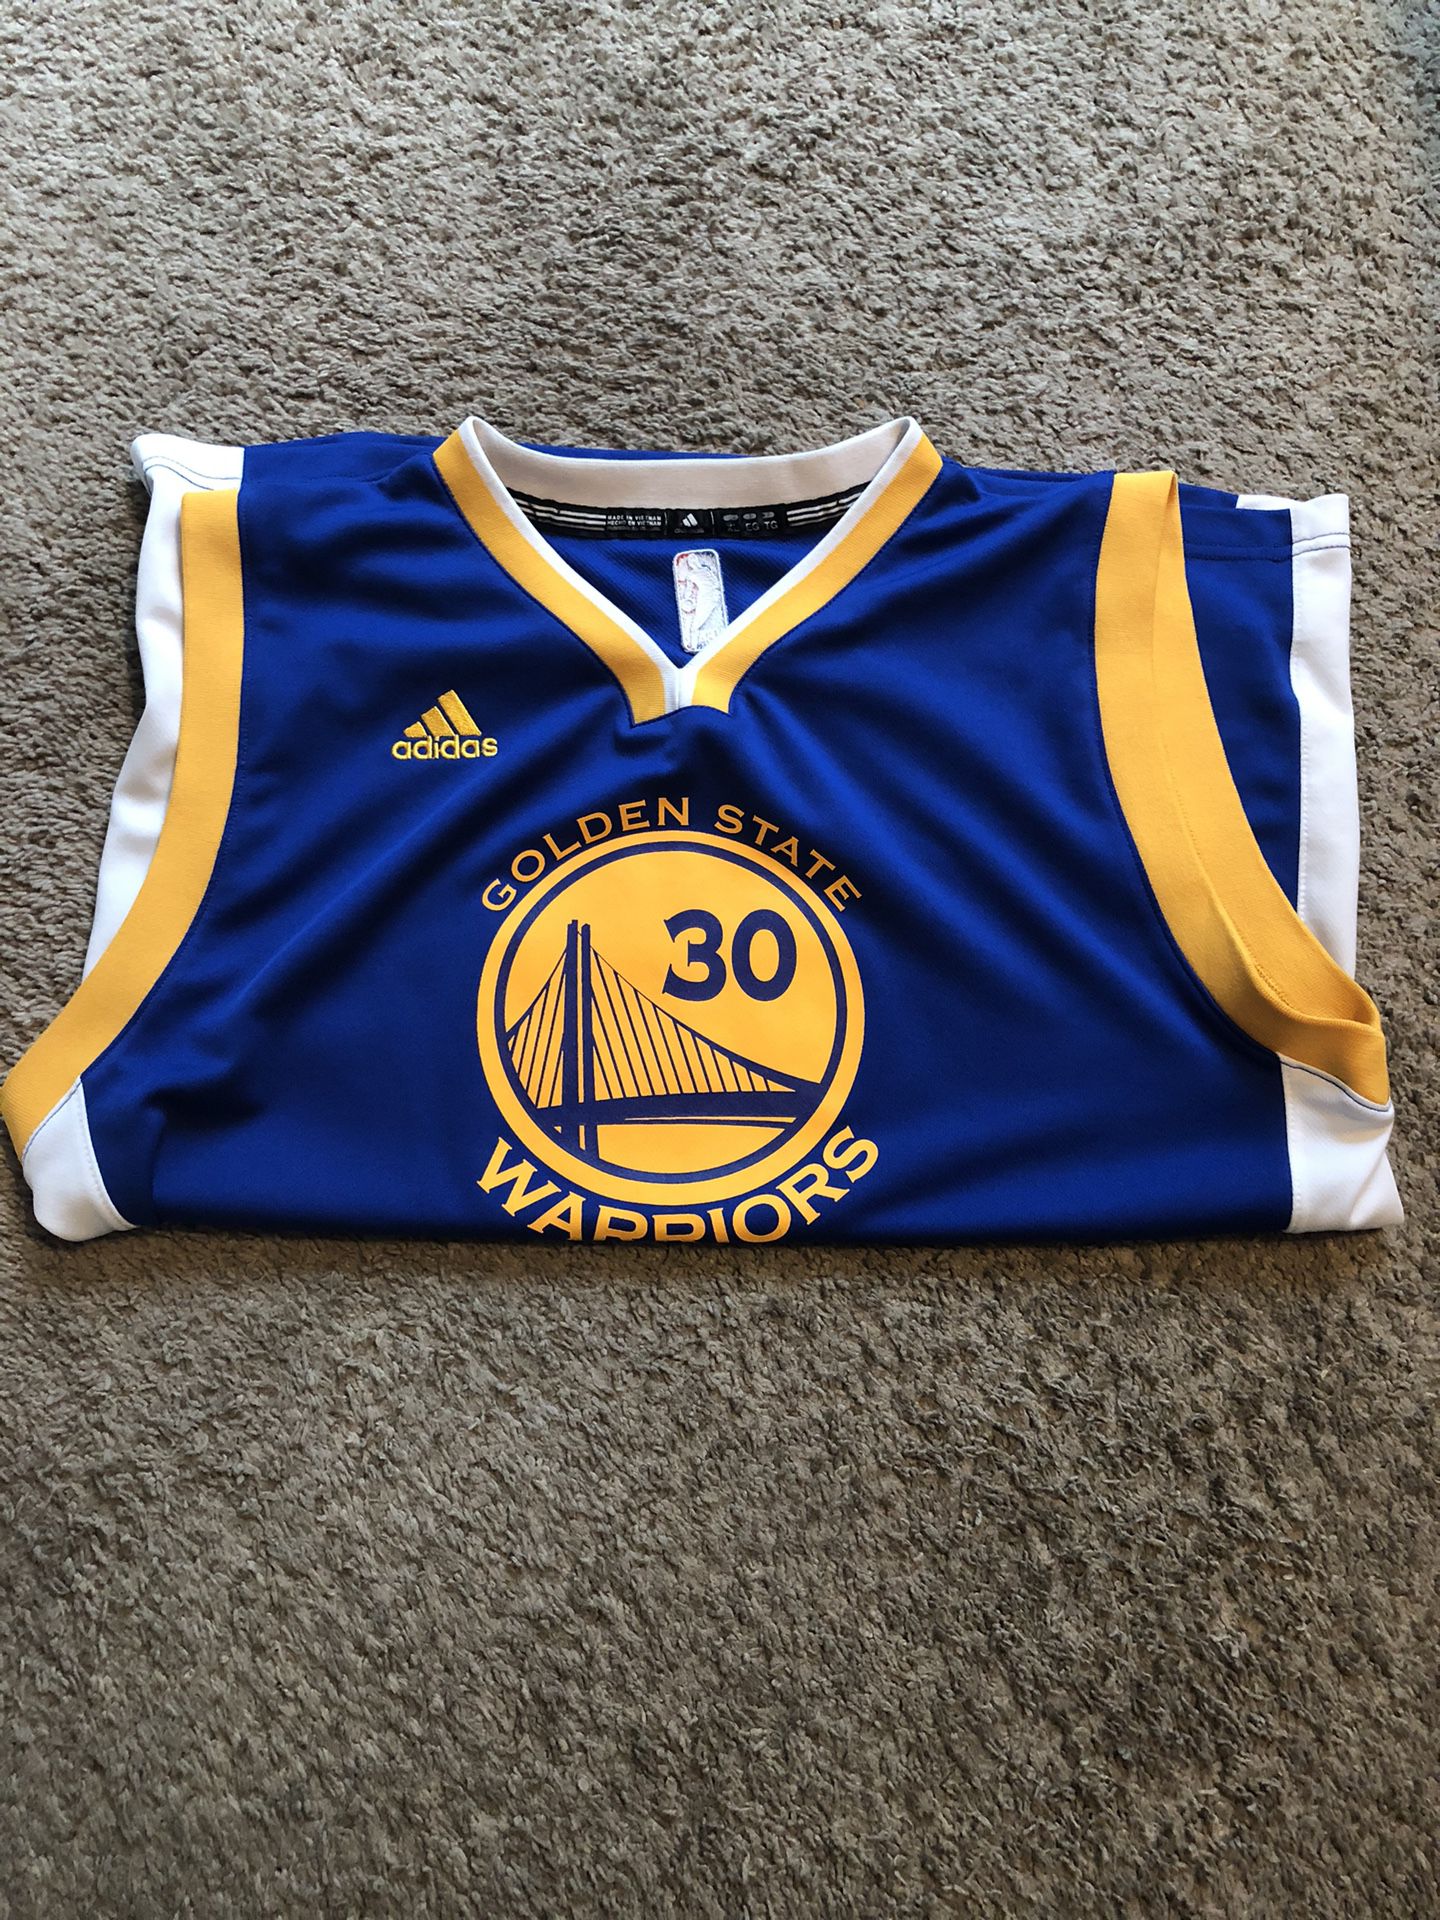 adidas youth curry jersey